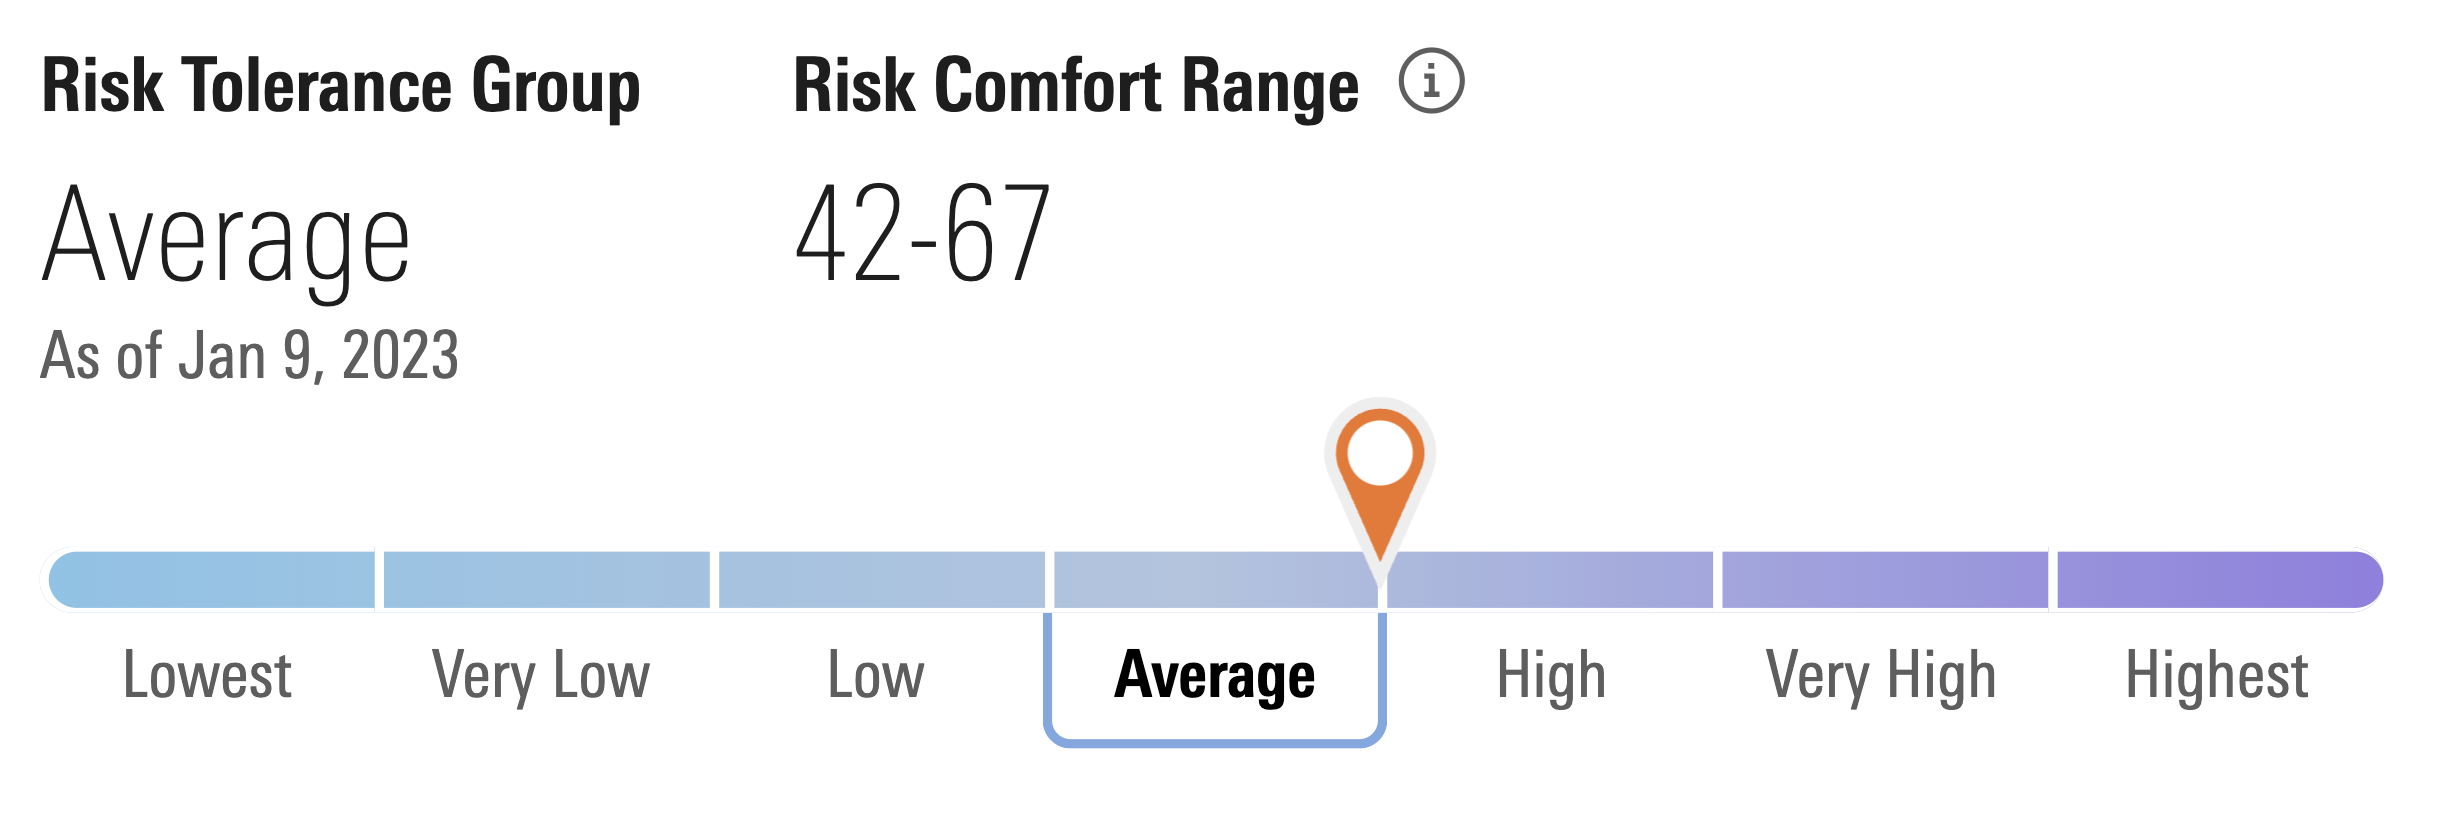 The risk comfort range shows where clients fall on a spectrum of conservative to aggressive investors.